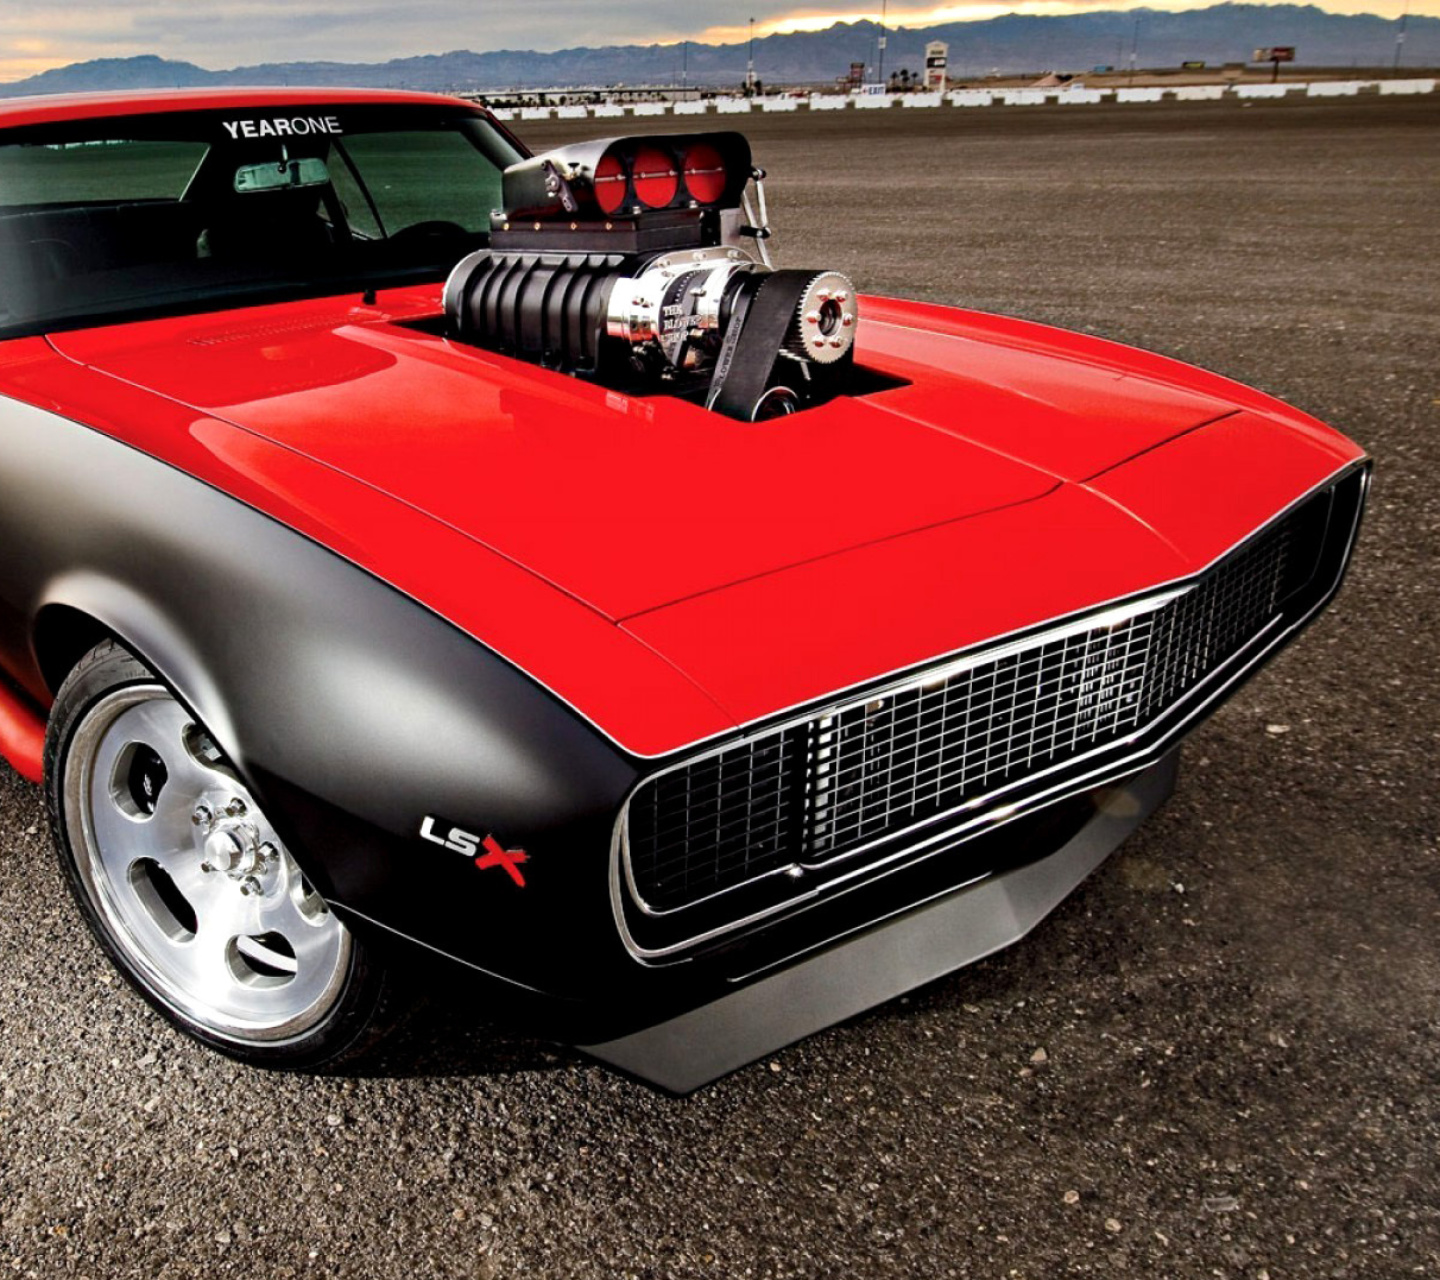 Chevrolet Hot Rod Muscle Car with GM Engine wallpaper 1440x1280